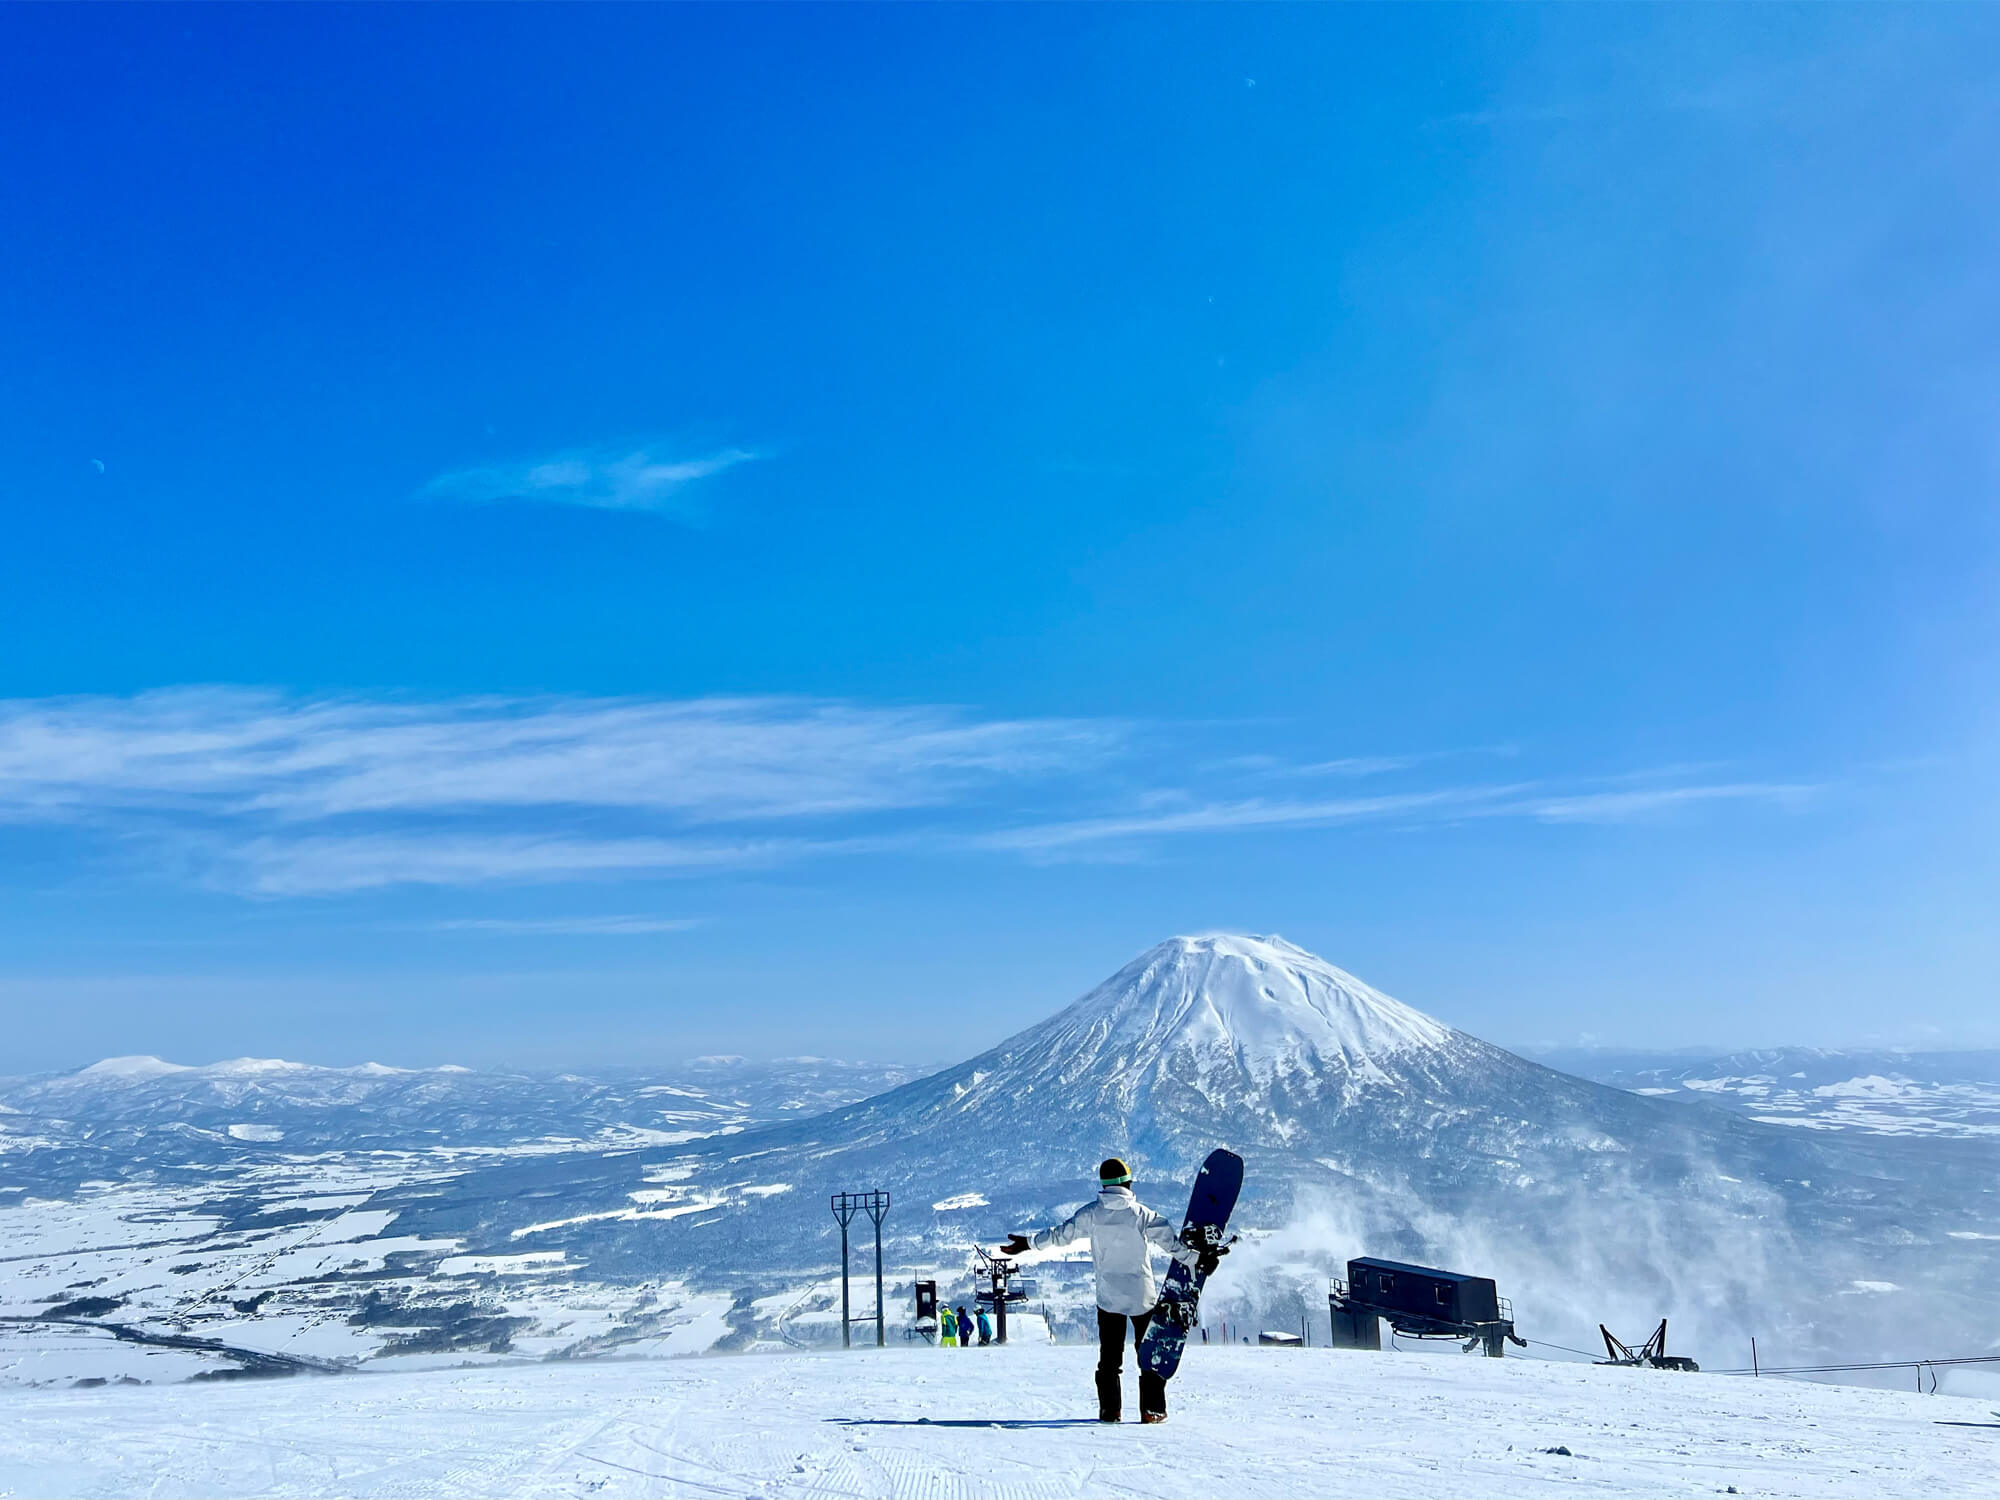 Ski Bliss Awaits: Hotel＆ Ski Package: Stay 3 Nights at Sapporo, Ski Bus, and Lift Ticket Included! image